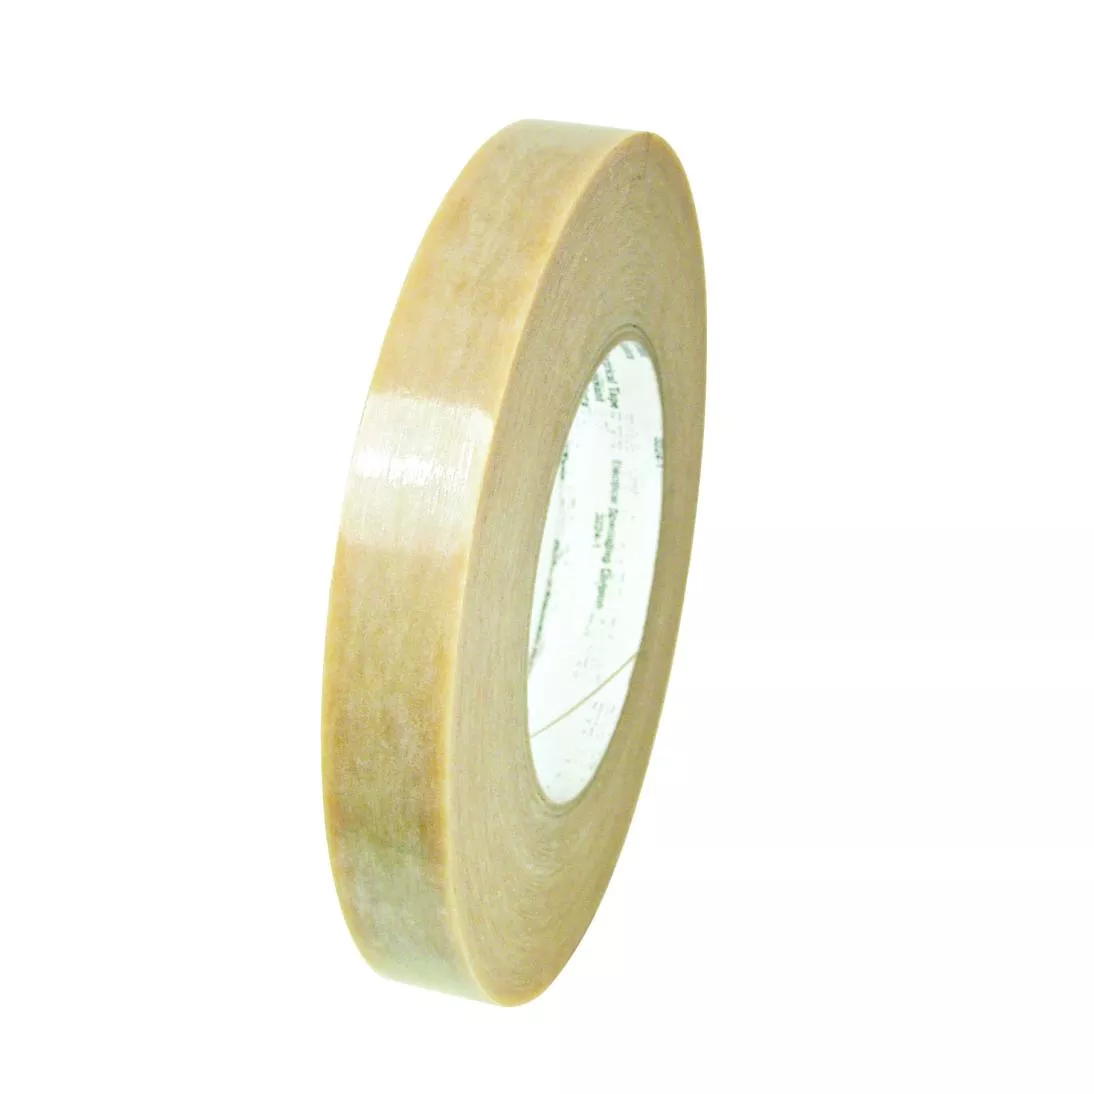 3M™ Polyester Film Electrical Tape 54, Translucent, 1 mil film, 1 in x
72 yd (25,40 mm x 66 m), 36/Case